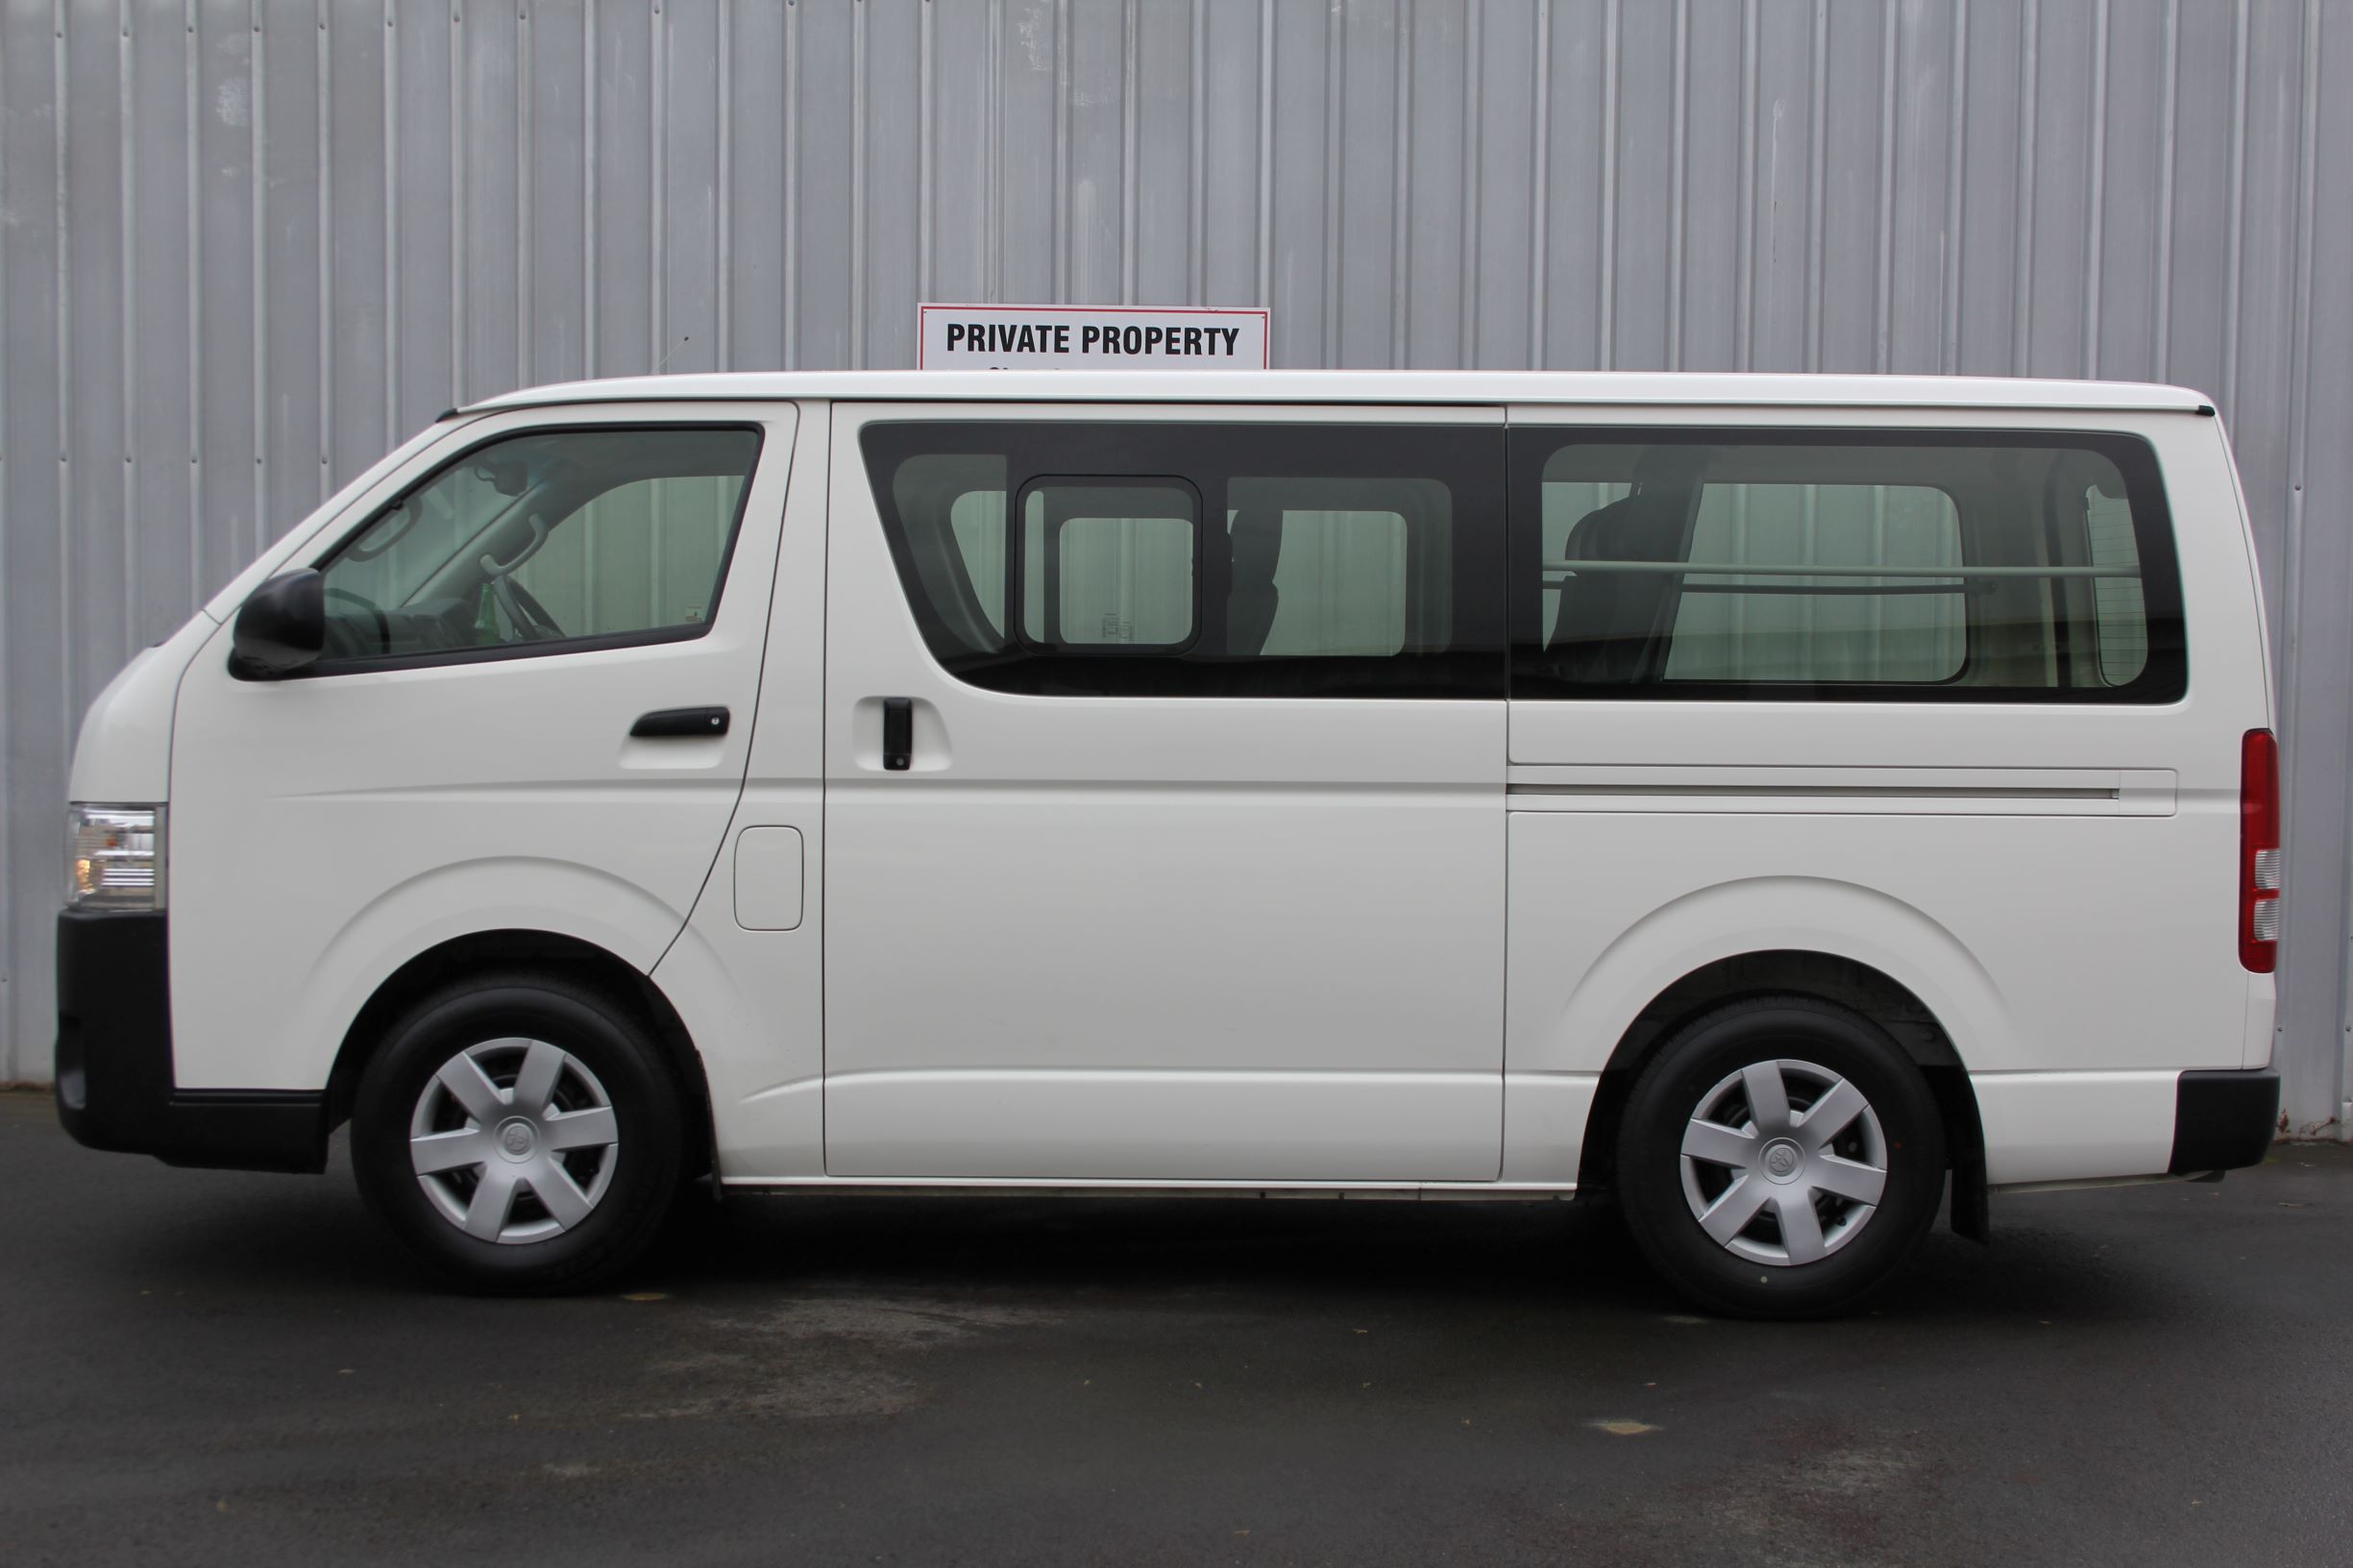 Toyota Hiace MINIBUS 2014 for sale in Auckland